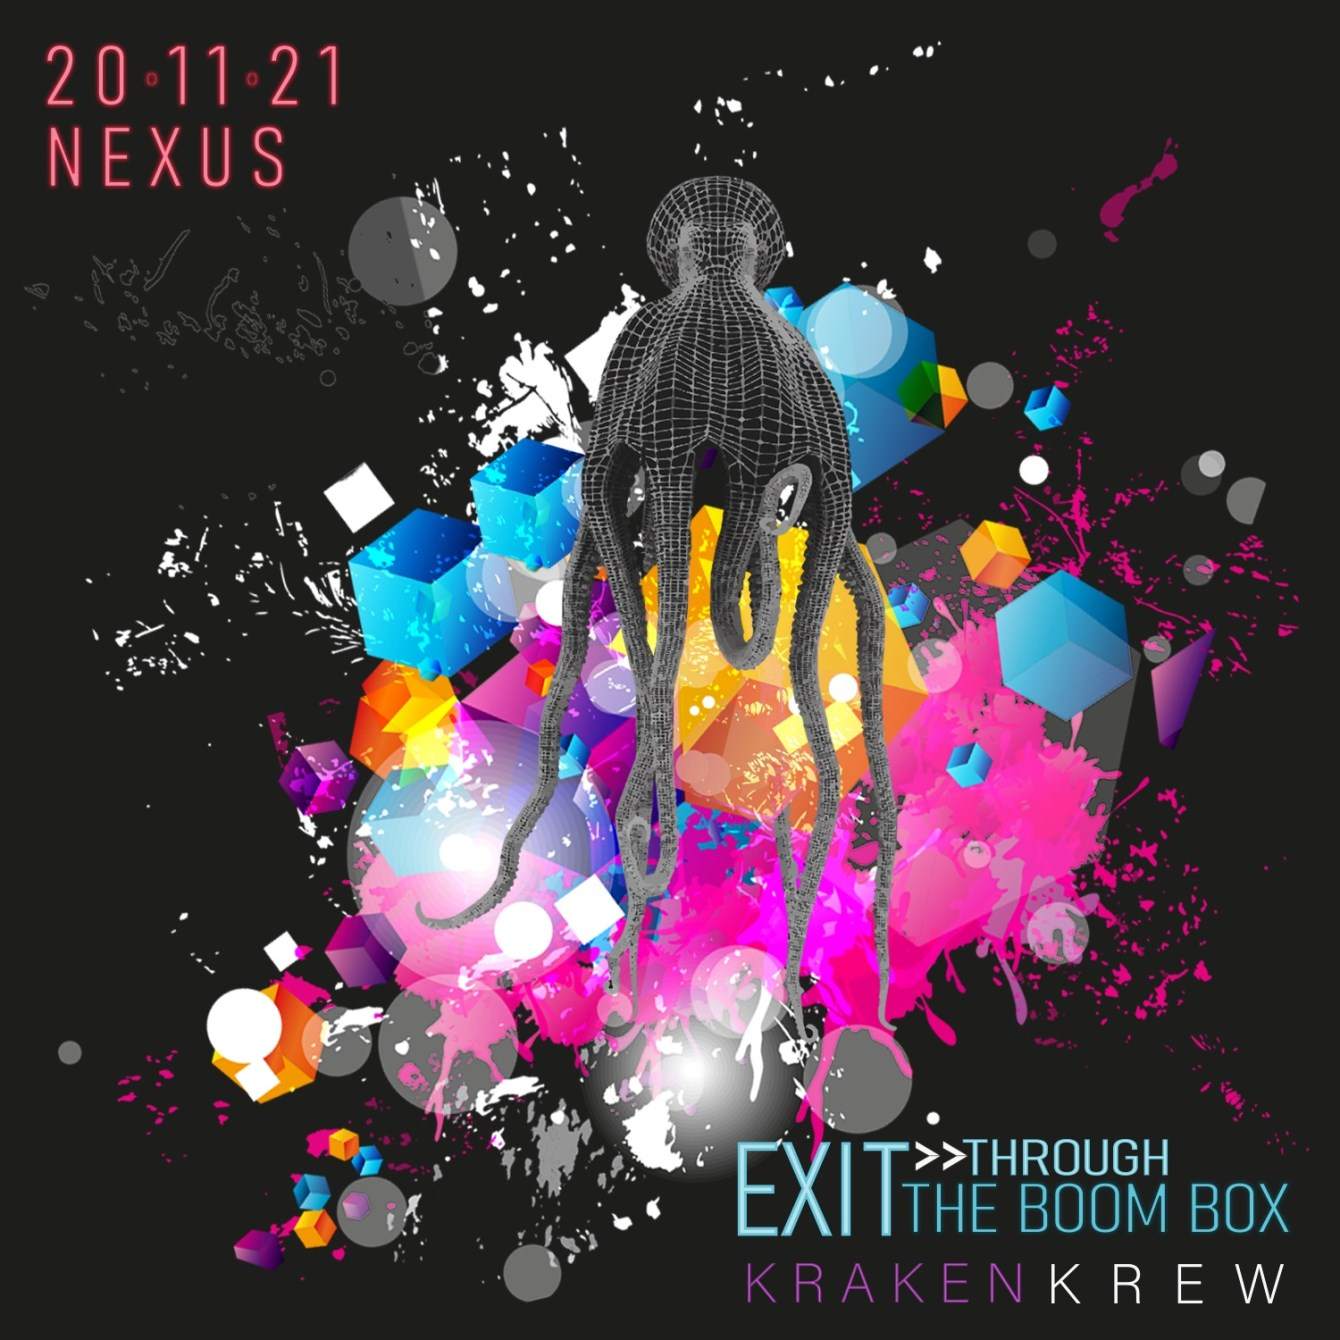 Exit Through the Boombox - Página frontal